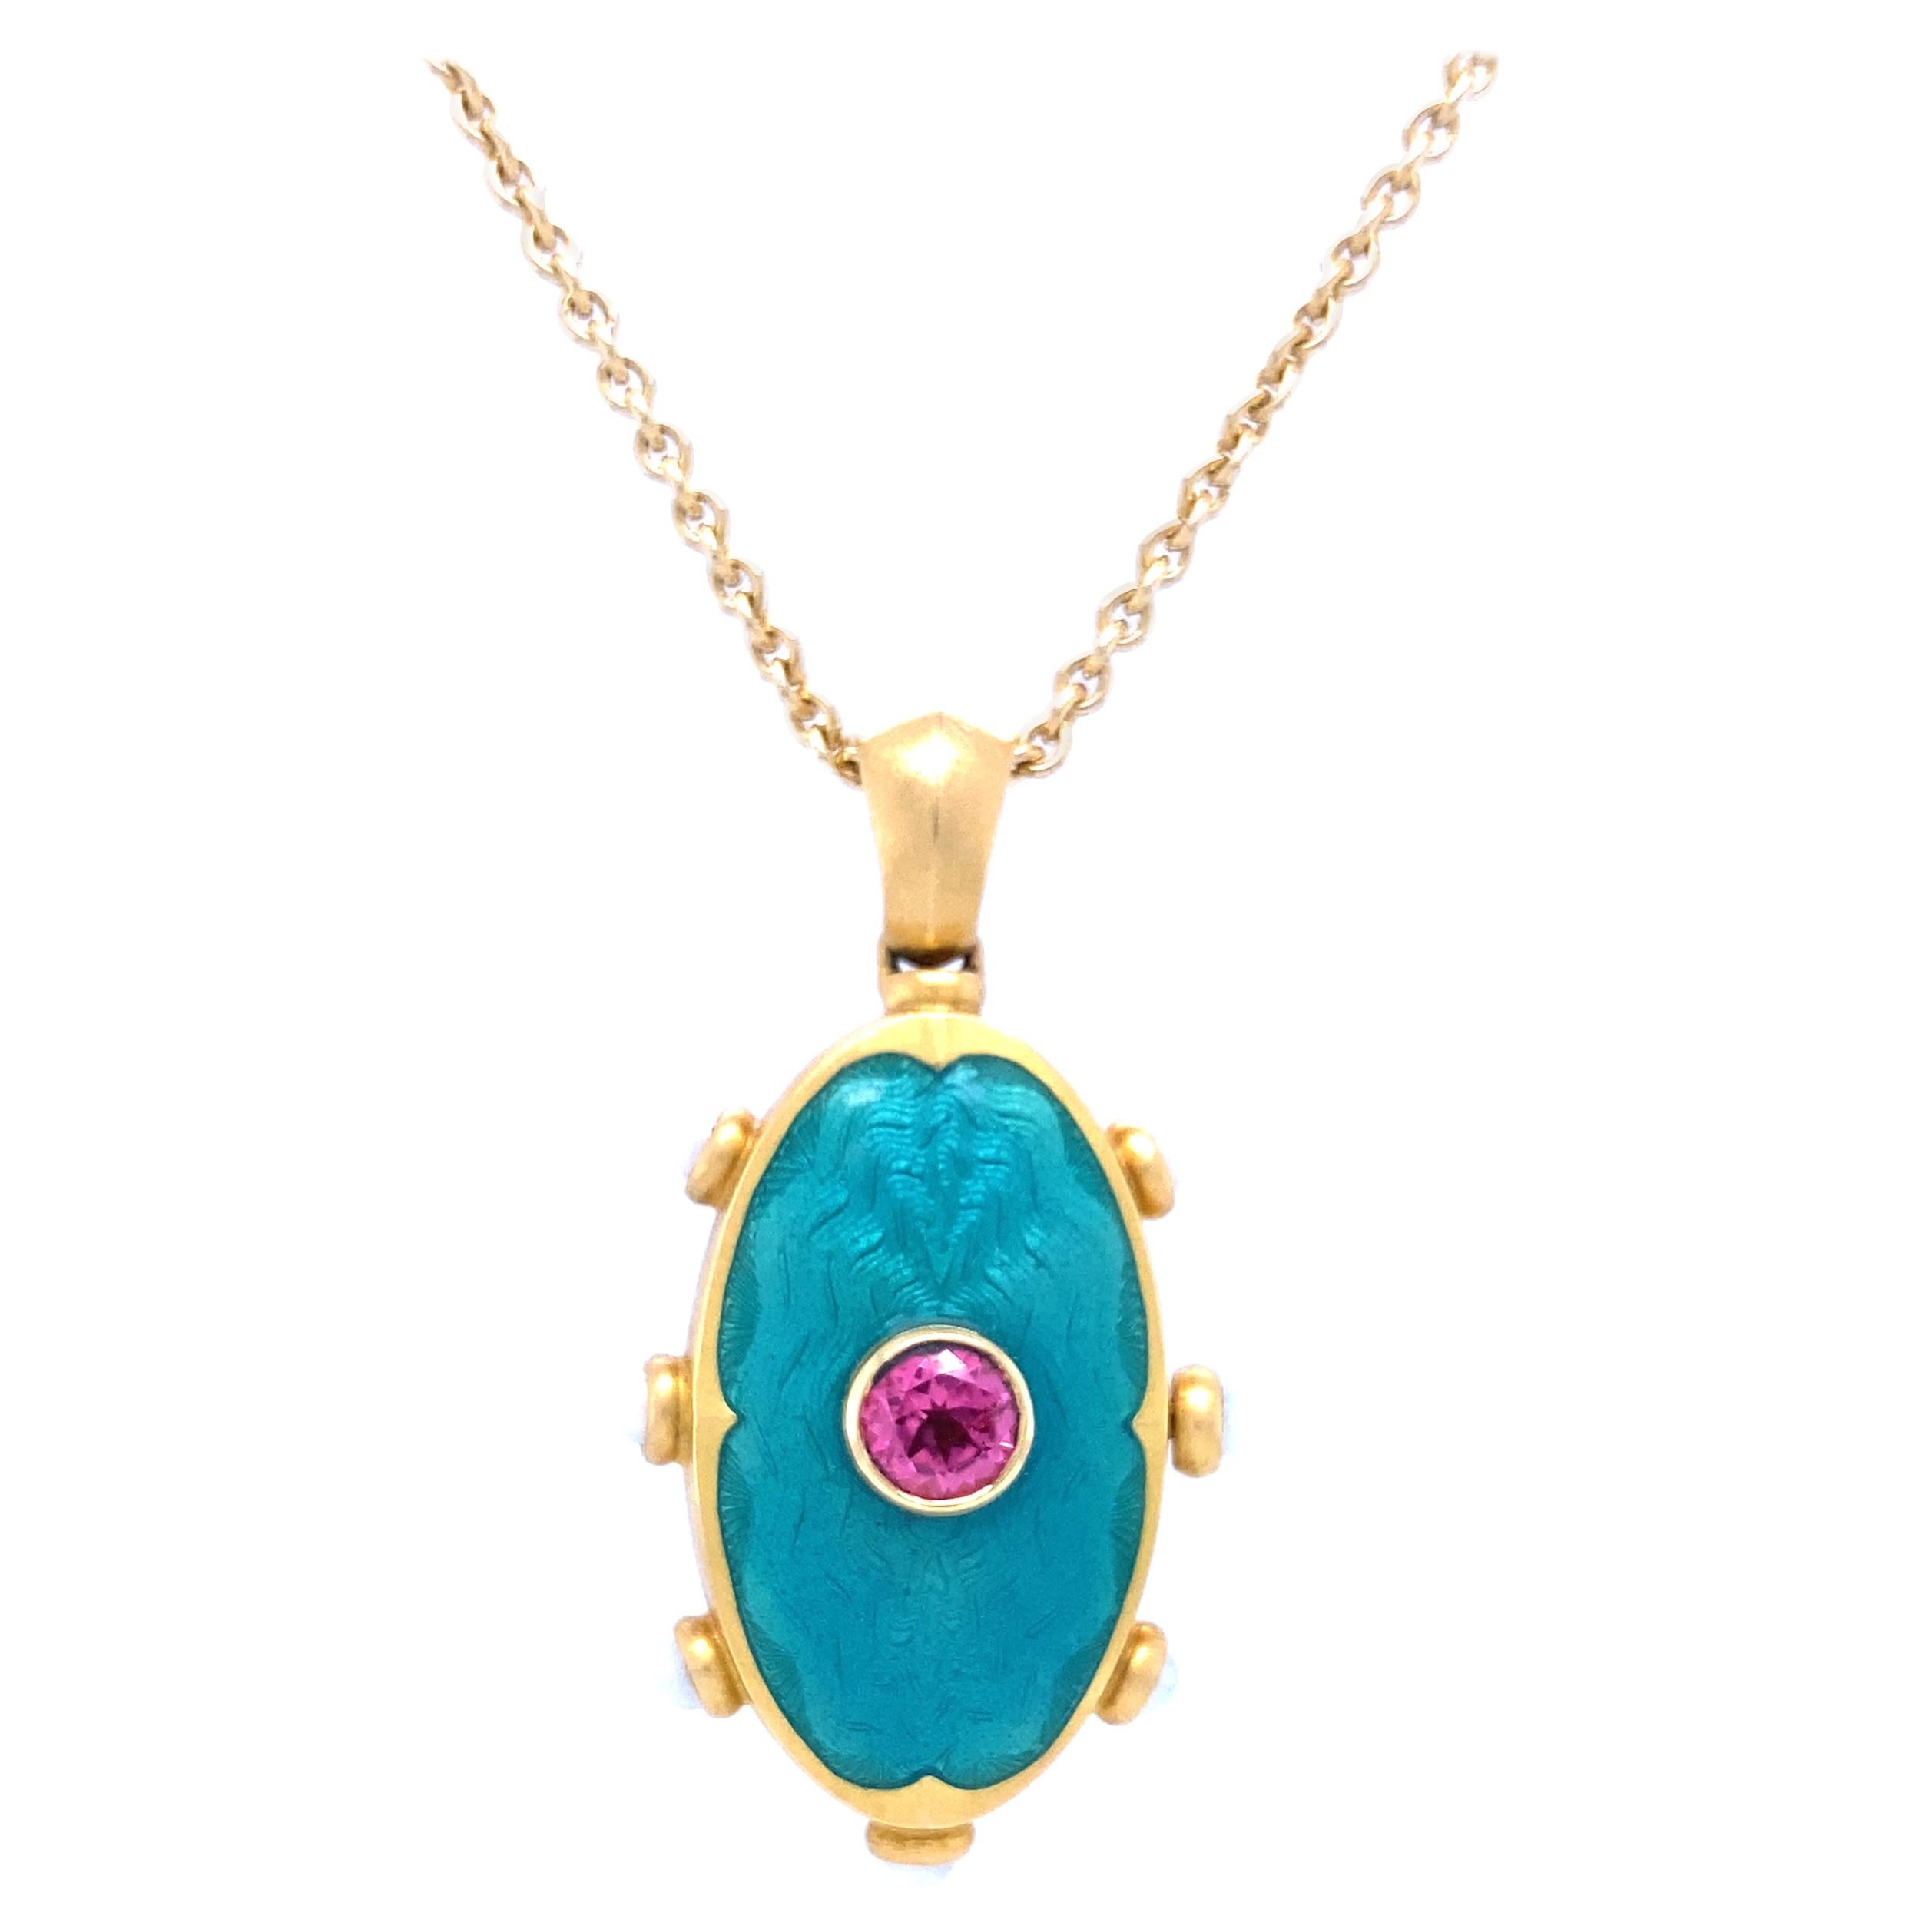 Oval Locket Pendant Necklace 18k Yellow Gold Turquoise Enamel Rubellite & Pearls For Sale